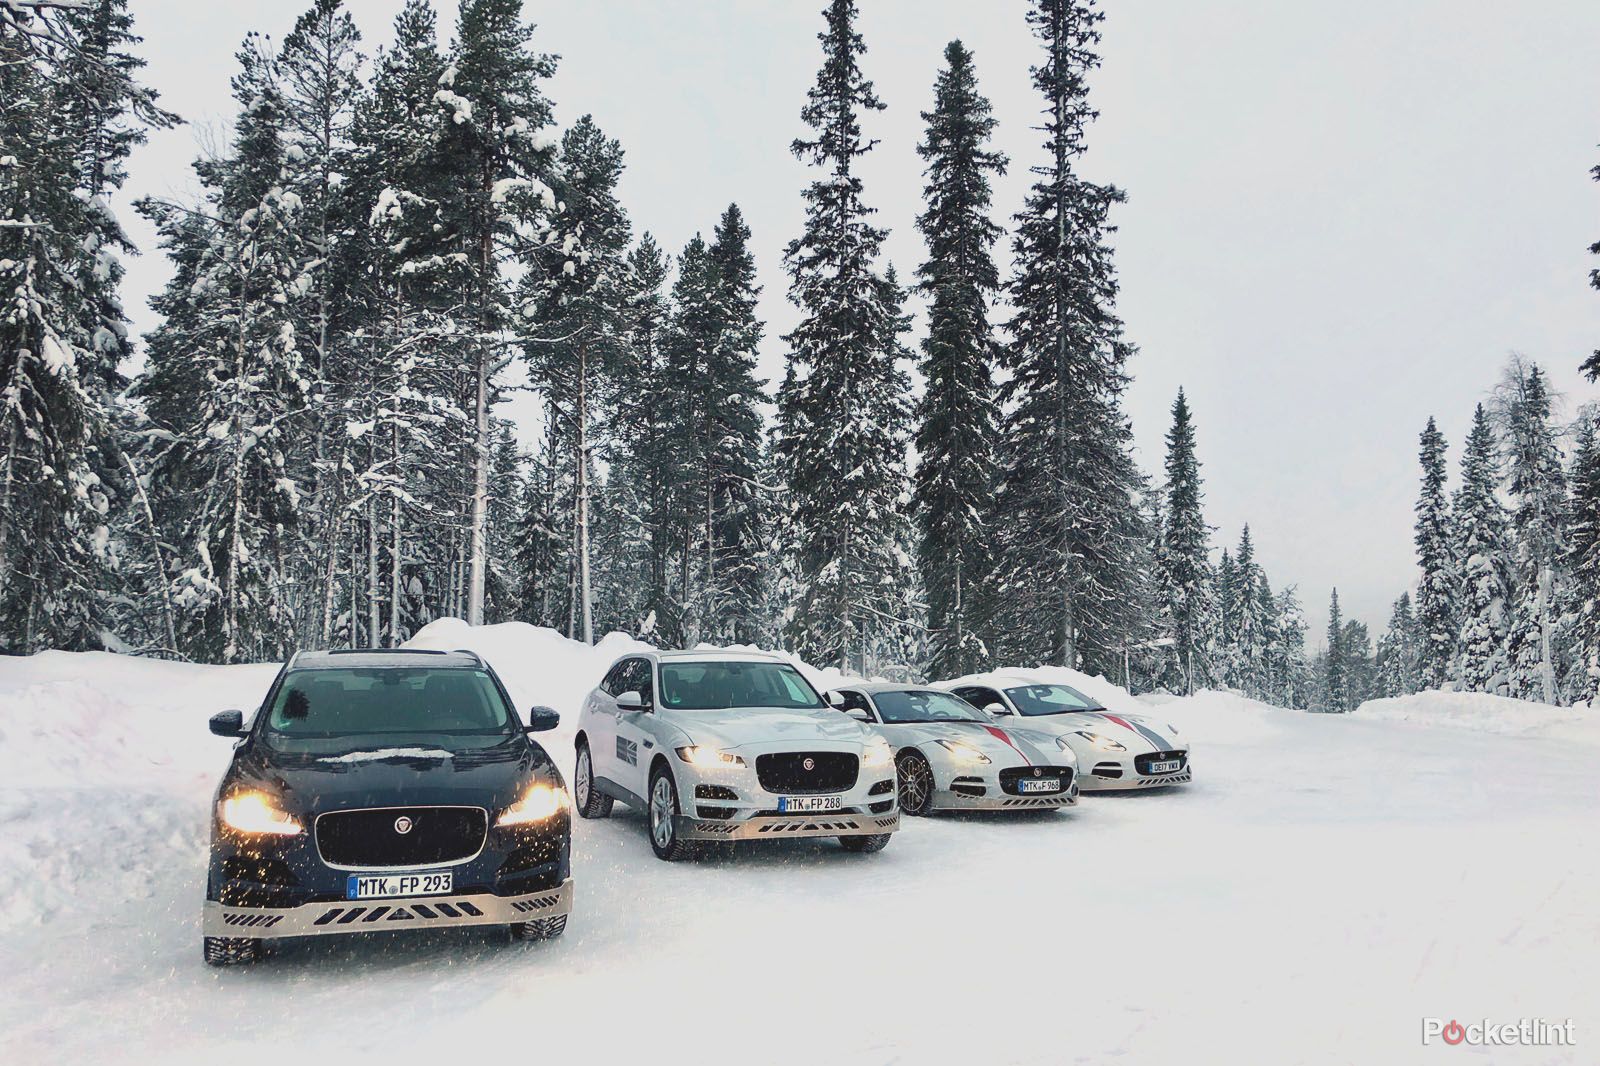 Driving On Ice At The Jlr Ice Academy On The Edge Of The Arctic Circle image 1